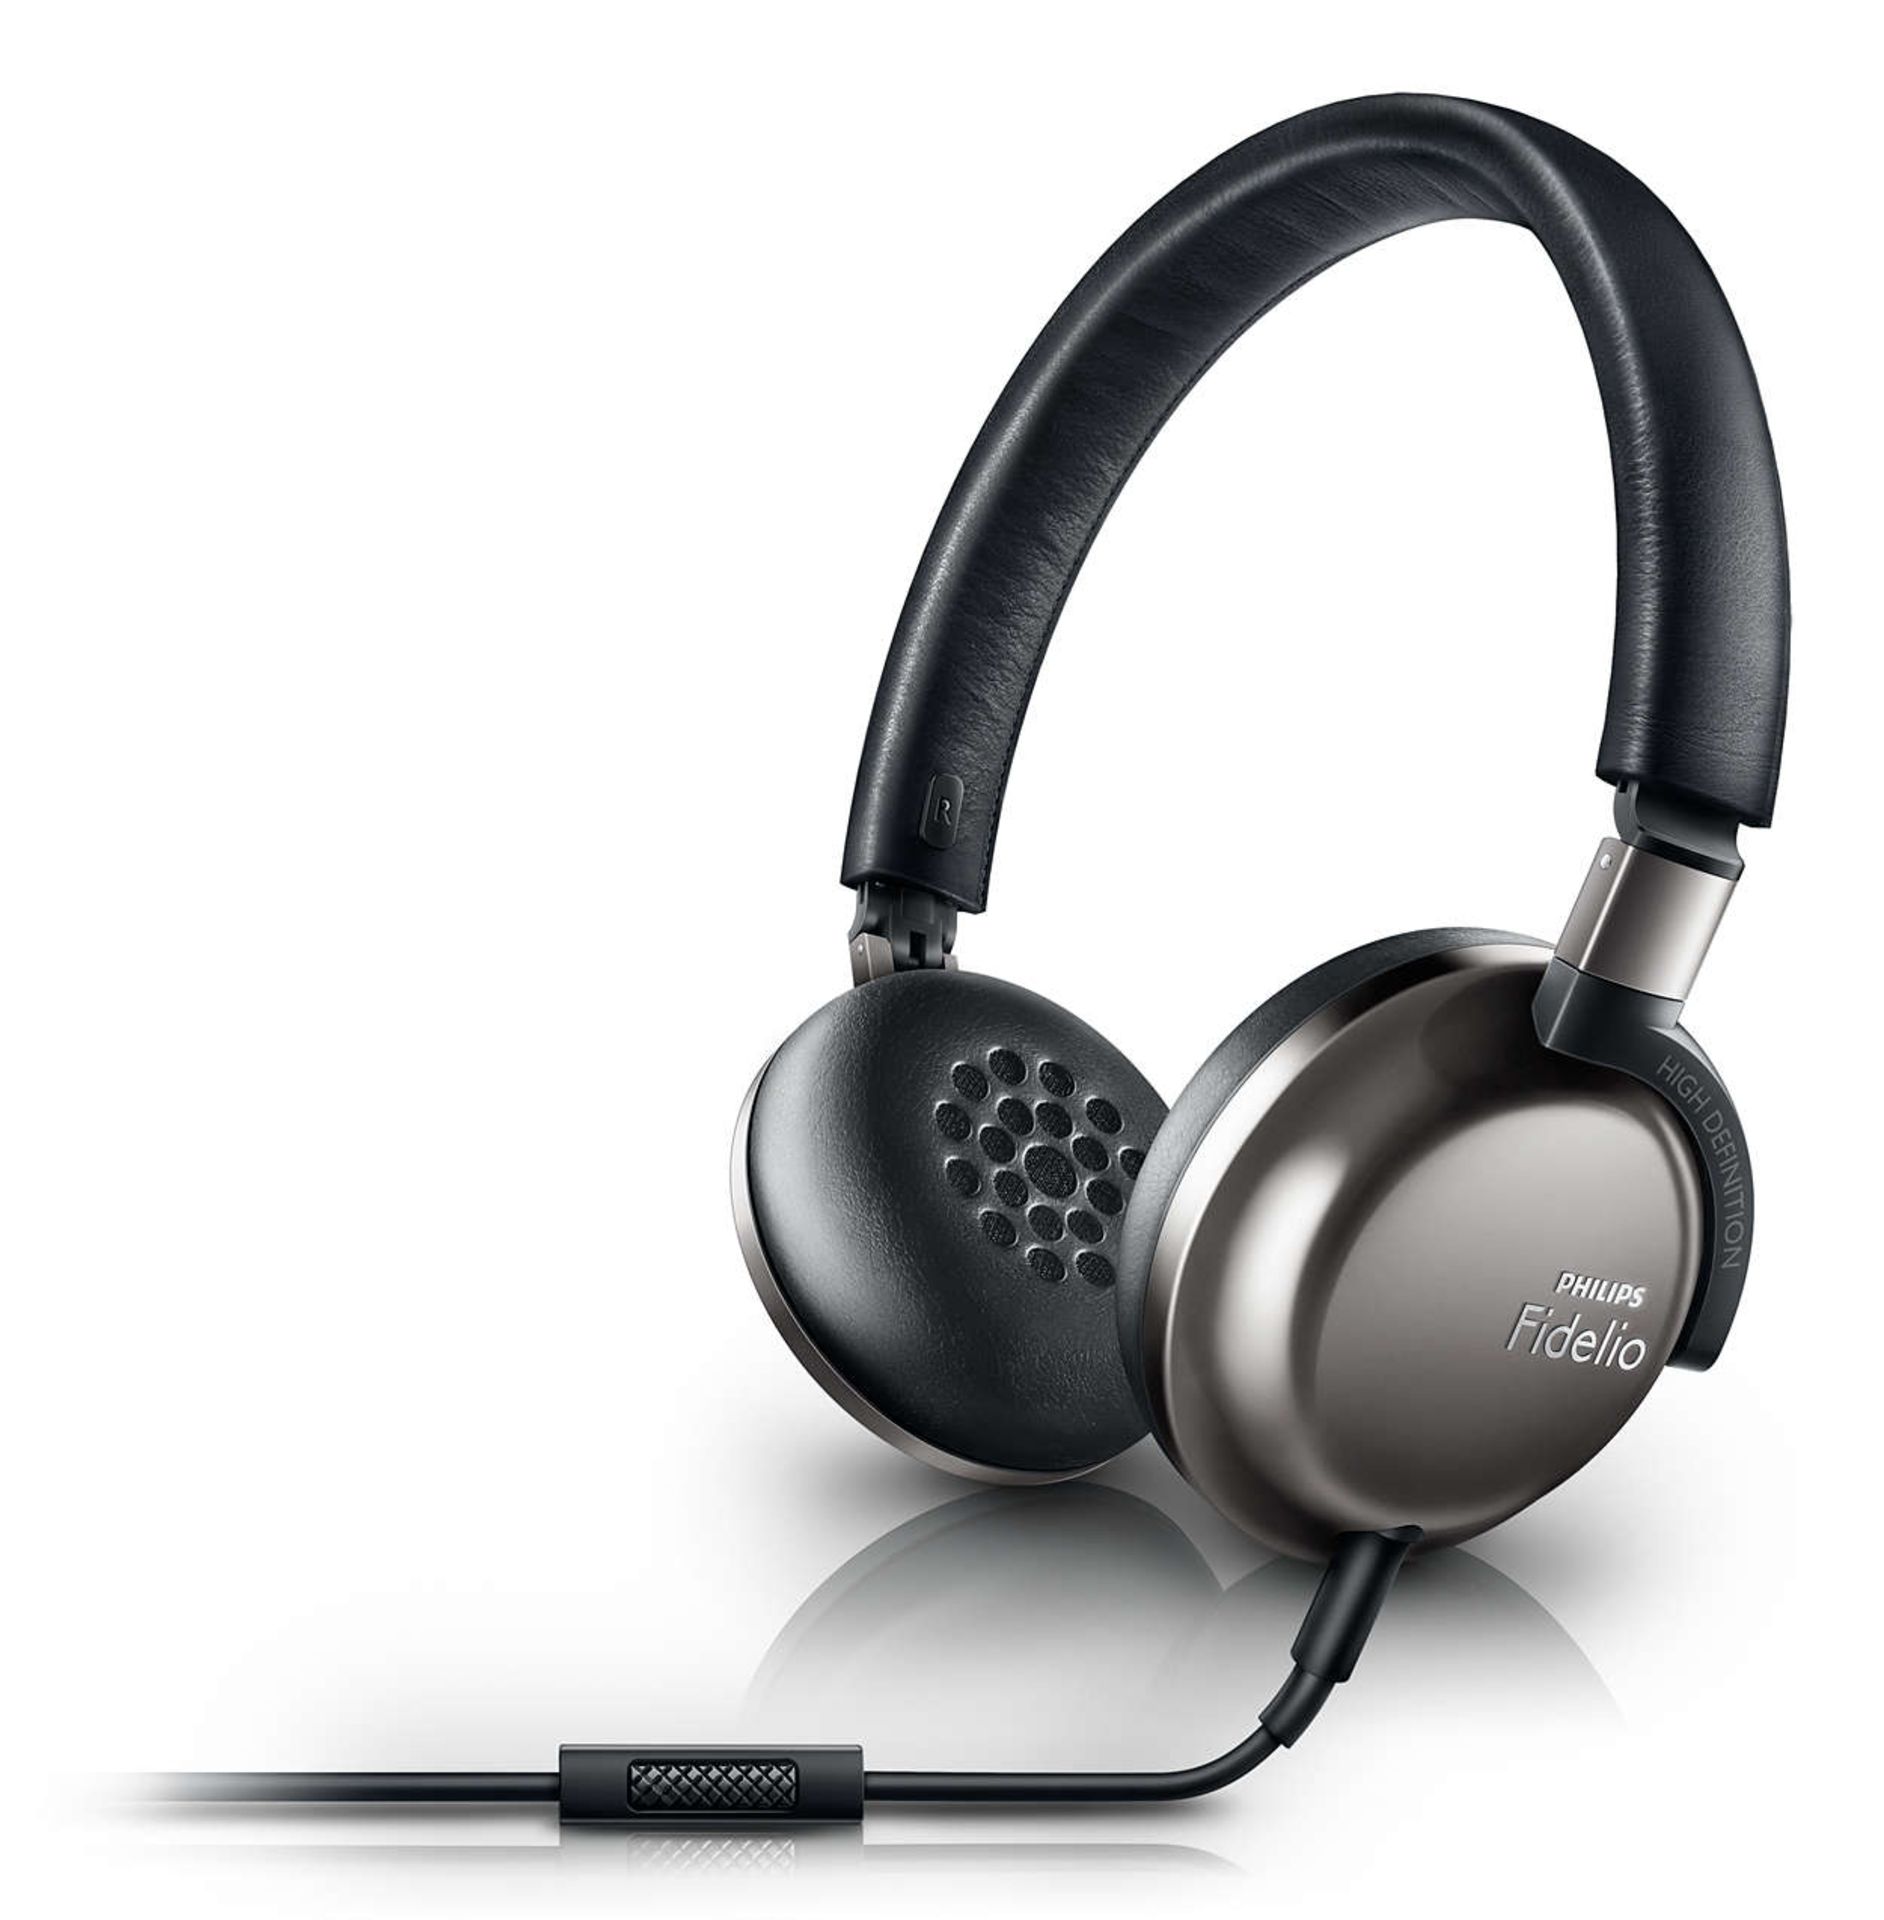 V Brand New Philips Fidelio F1 Lightweight On-Ear Headphones With Microphone With Hi-Res Audio - Image 2 of 2